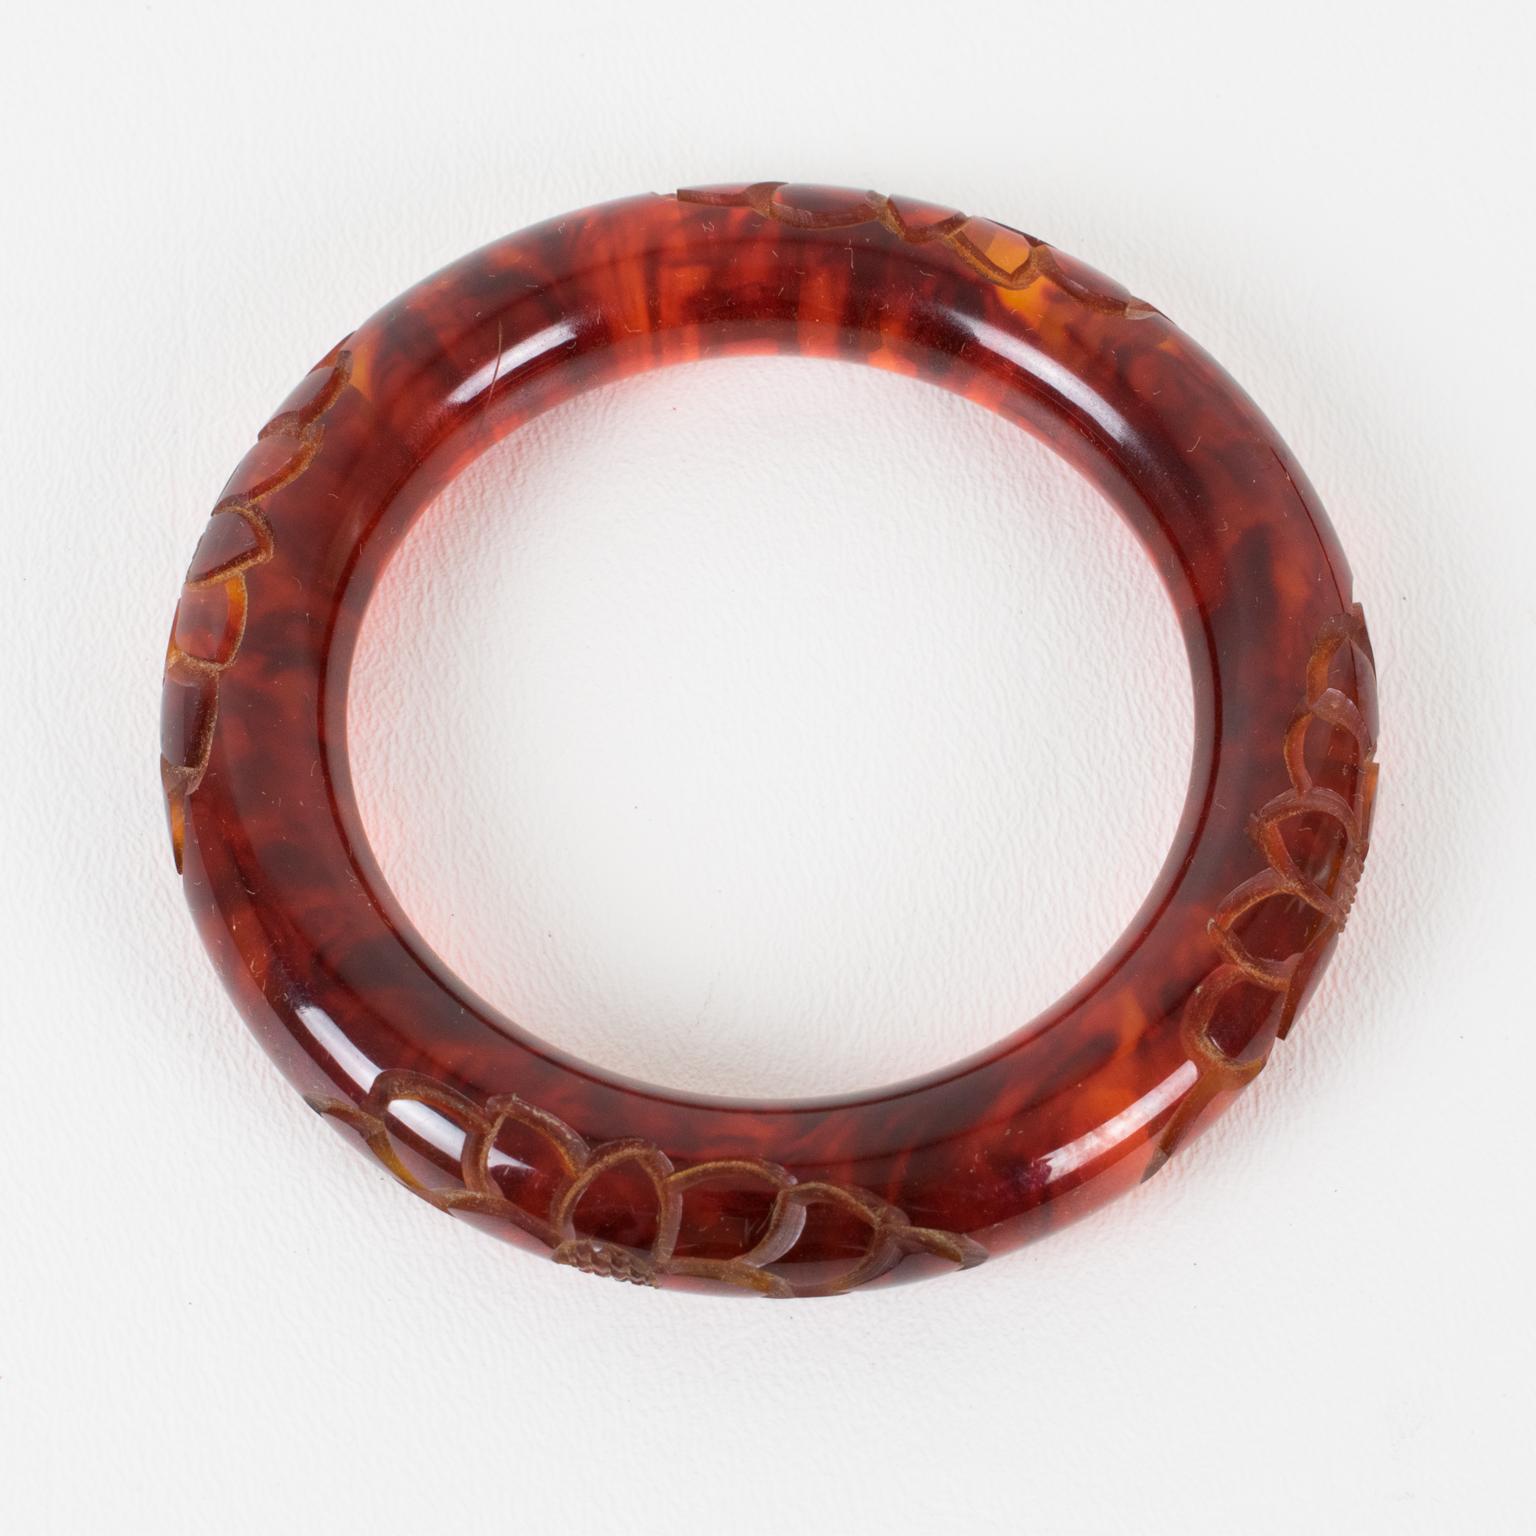 Bakelite Carved Bracelet Bangle in Cloudy Red Tea Amber Color In Excellent Condition For Sale In Atlanta, GA